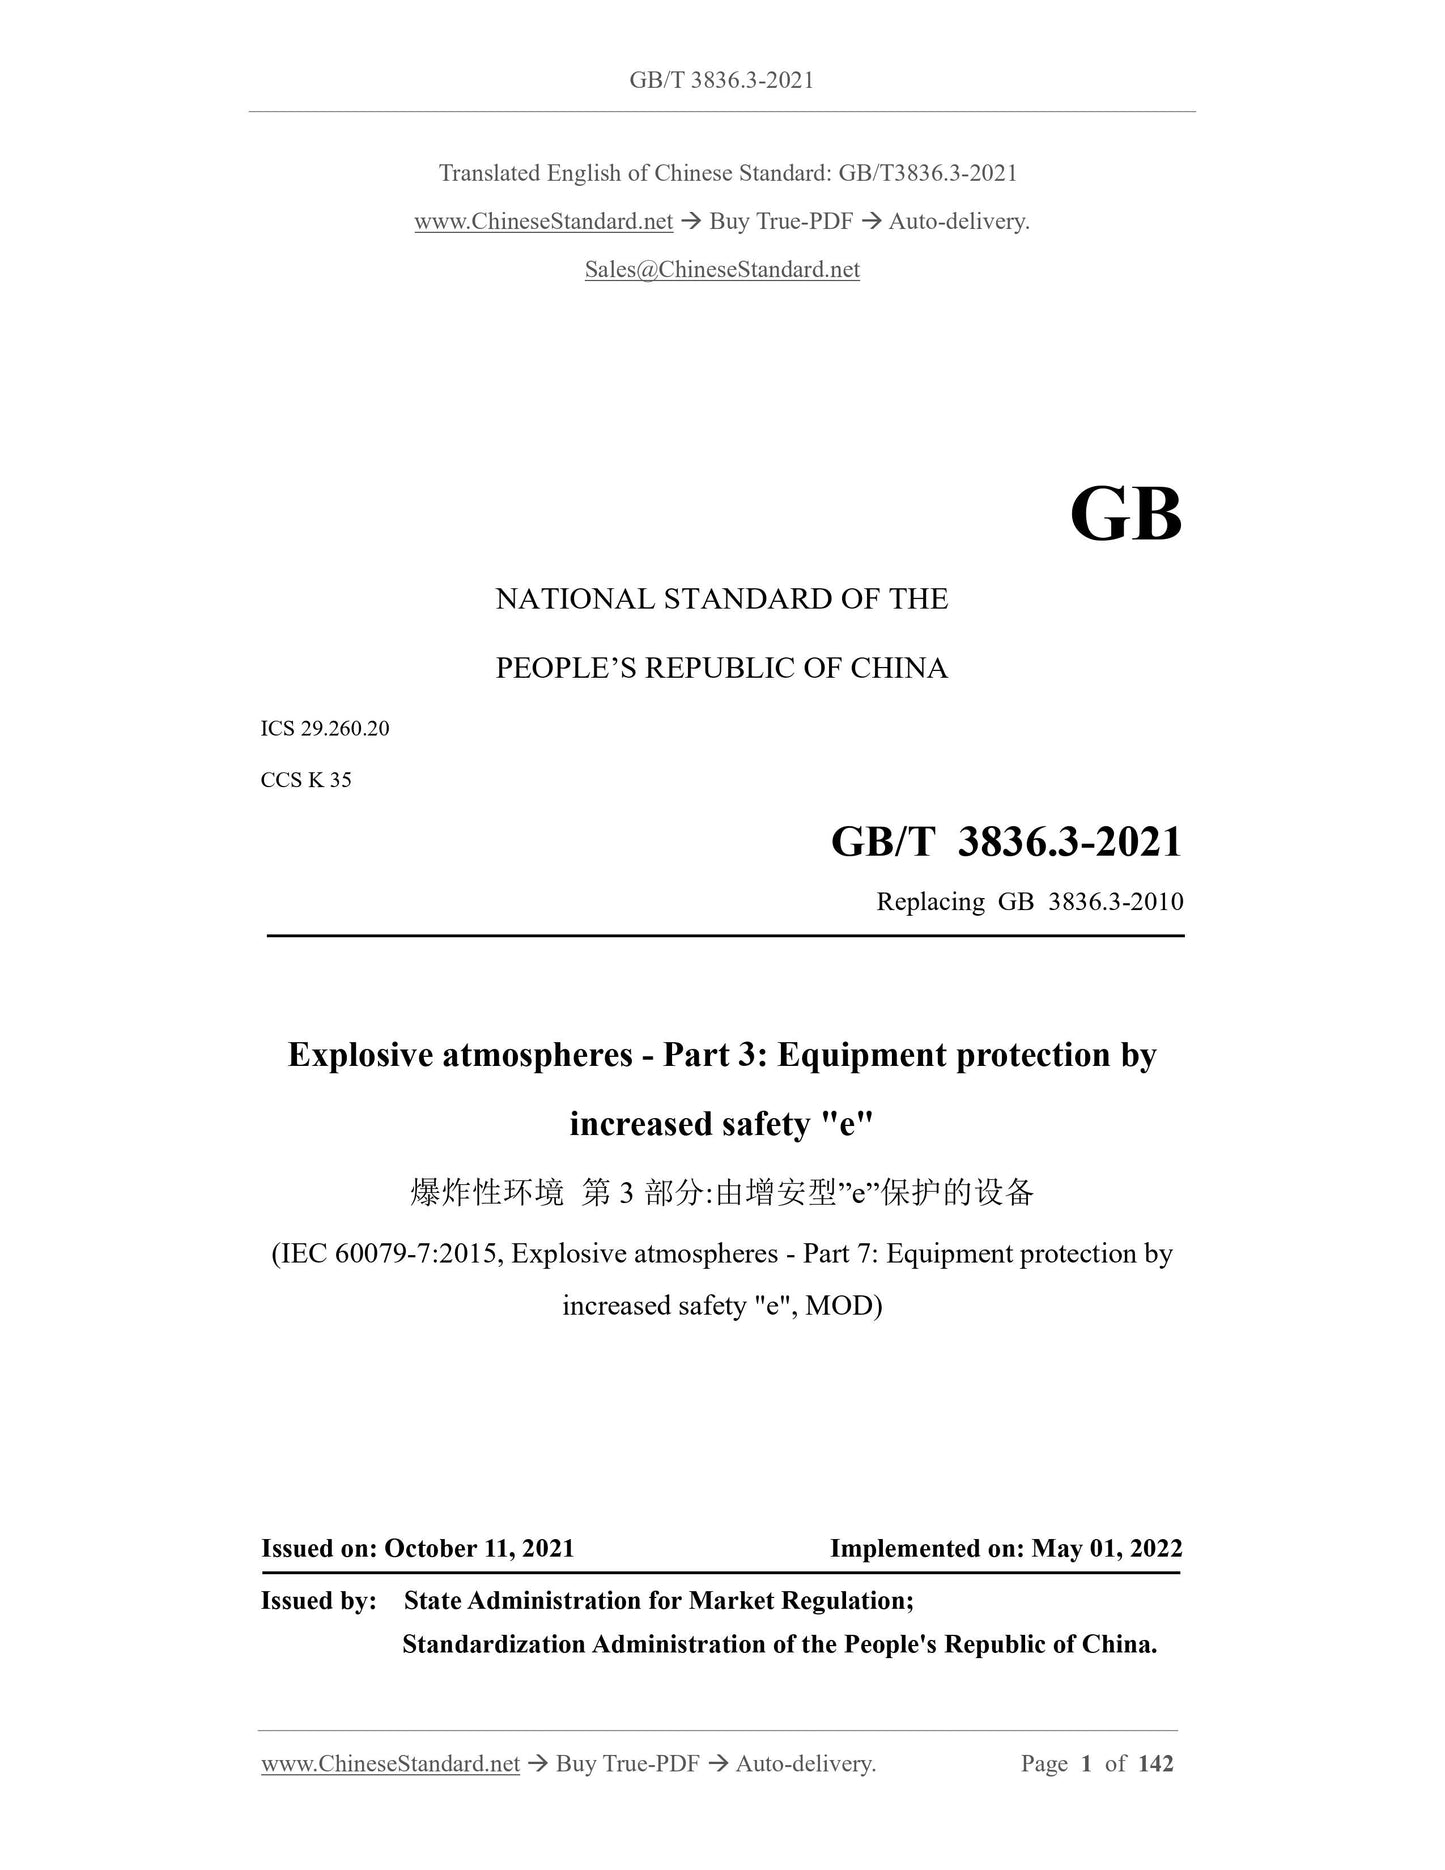 GB/T 3836.3-2021 Page 1